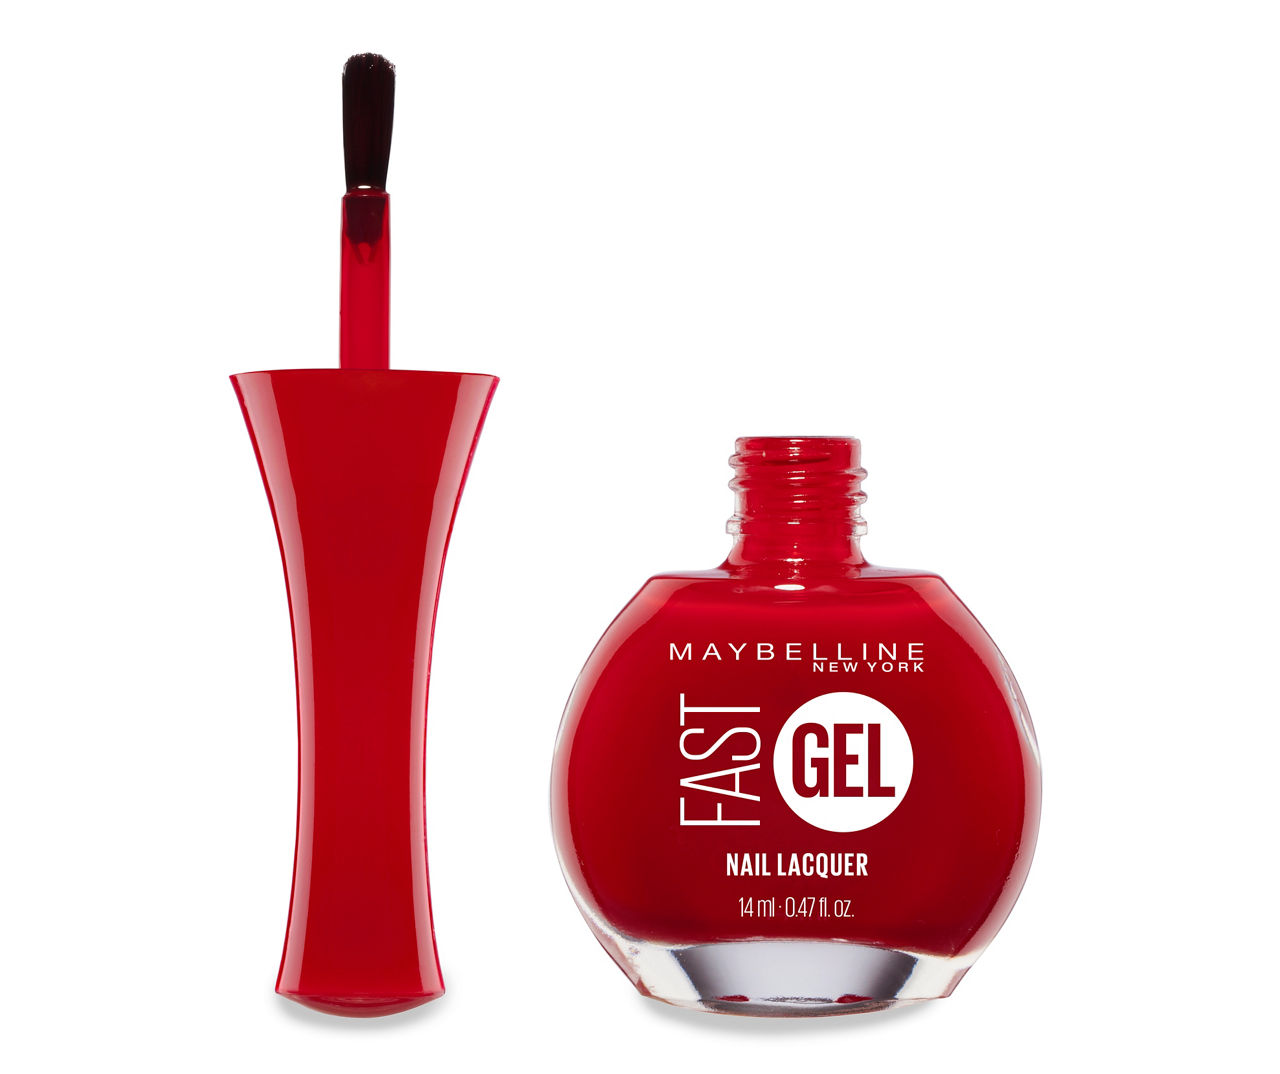 Maybelline Red Nail Big 0.47 Oz. | Rebel Gel Lots Lacquer,